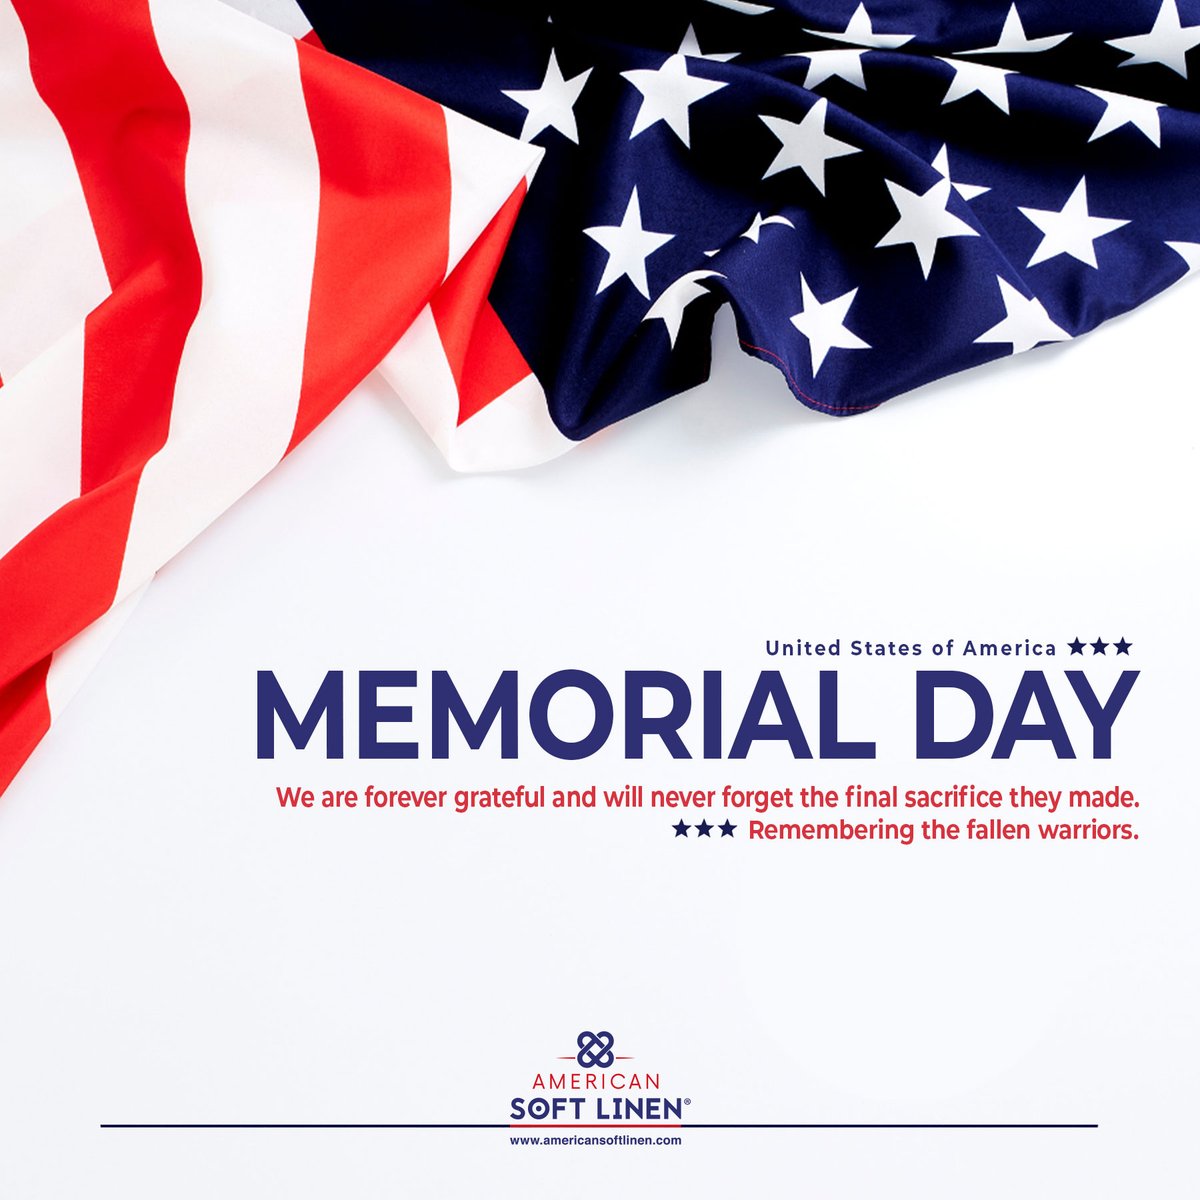 As we express our gratitude, we must never forget that the highest appreciation is not to utter words but to live by them.” –John F. Kennedy
#memorialday
#memorialday2023
#memorialdayweekend
#memorialdayweekend2023
#memorialdaysale
#memorialdaysales
#memorialdaydeals
#Towels